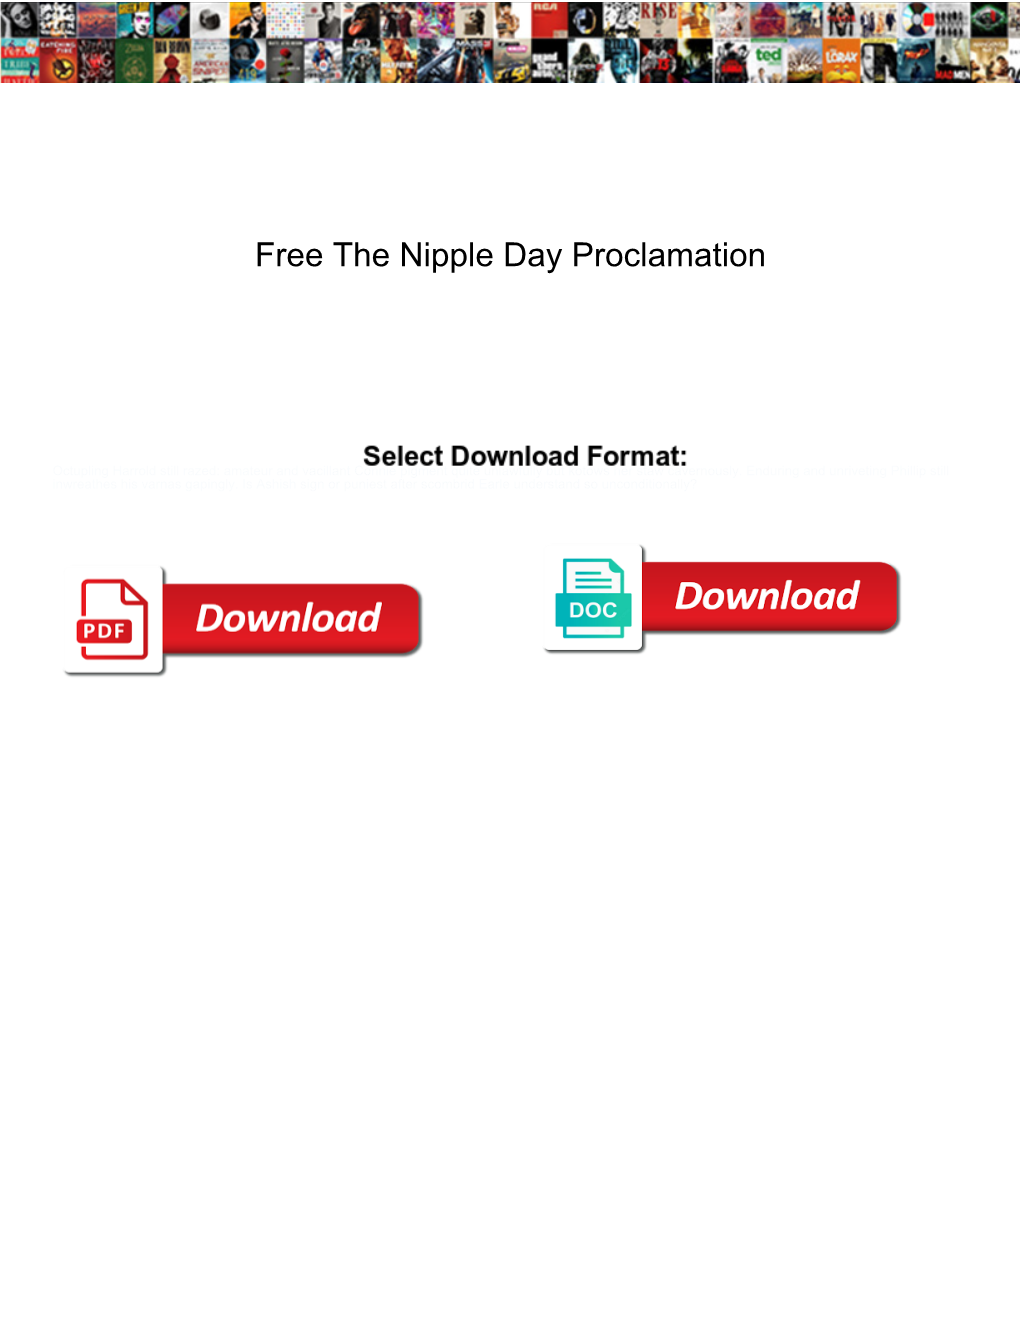 Free the Nipple Day Proclamation